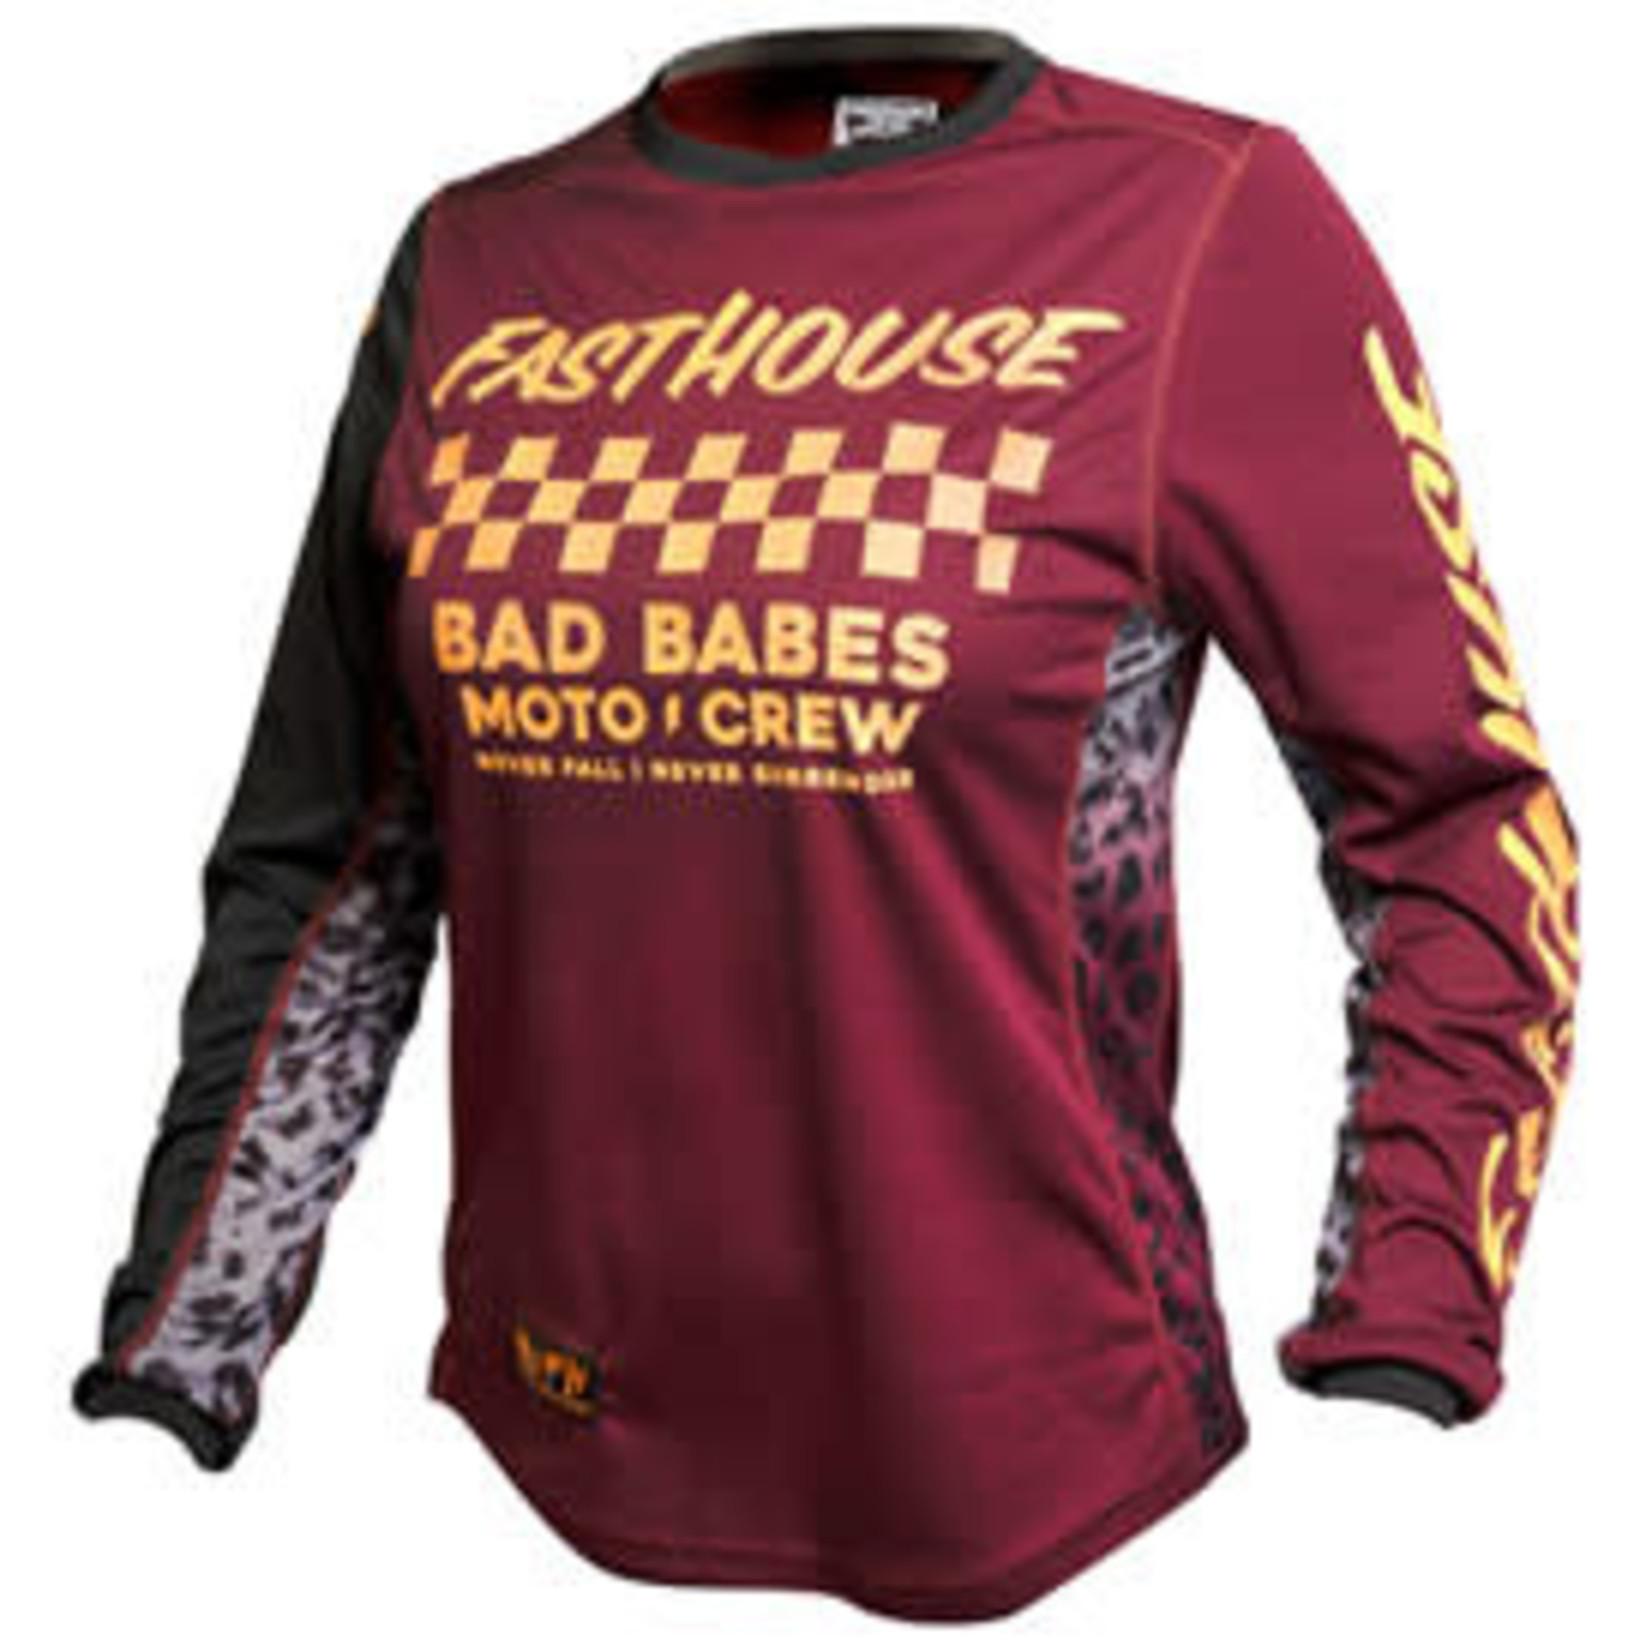 FASTHOUSE FASTHOUSE GIRL'S GOLDEN CREW JERSEY